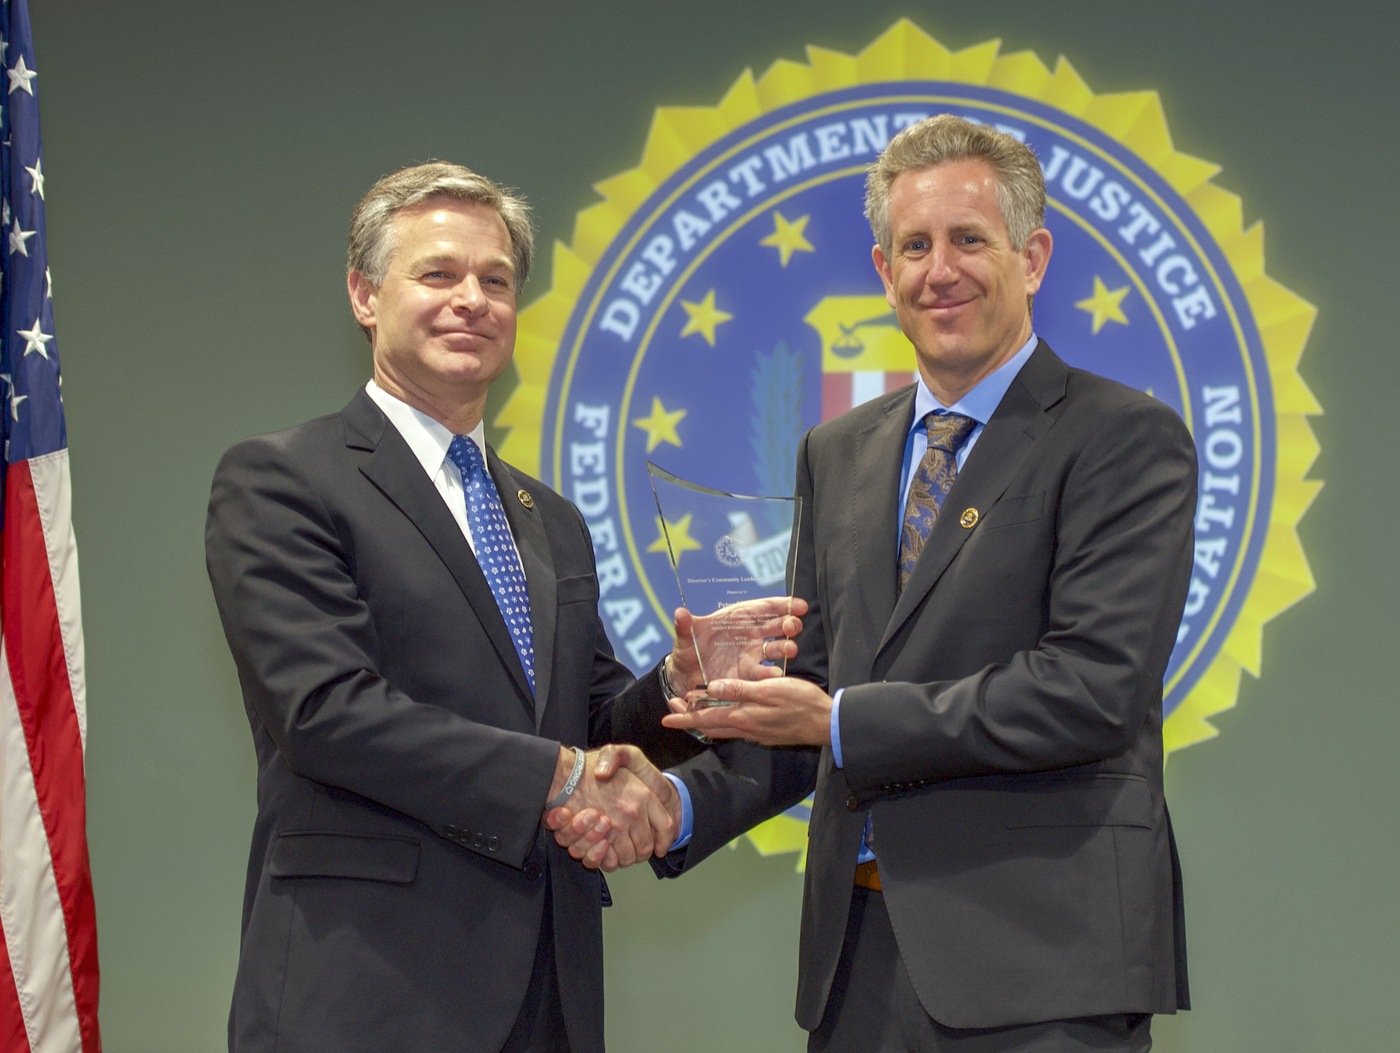 FBI Director Christopher Wray presents San Francisco Division recipient Ed Kressy with the Director’s Community Leadership Award (DCLA) at a ceremony at FBI Headquarters on May 3, 2019.